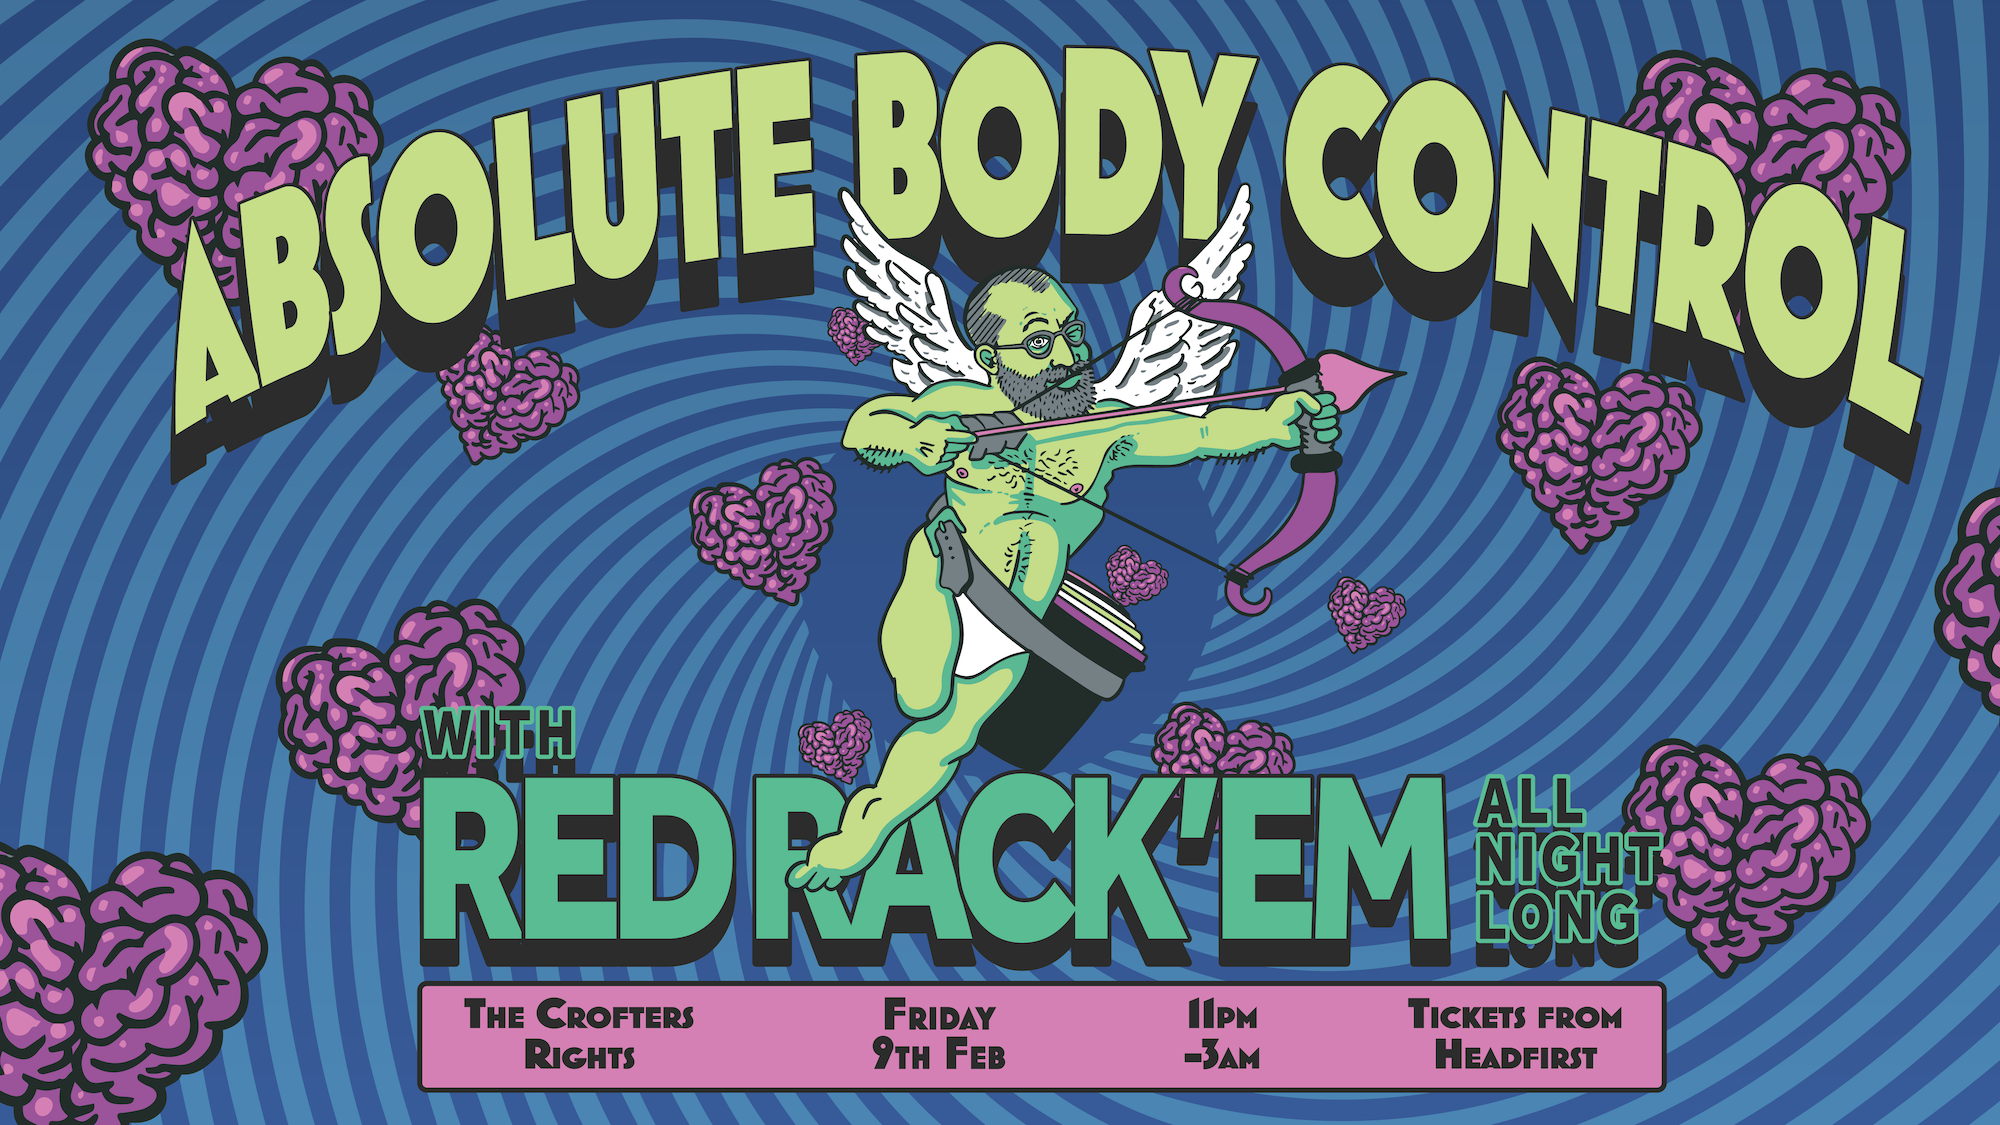 Absolute Body Control presents... Red Rack'em - フライヤー表